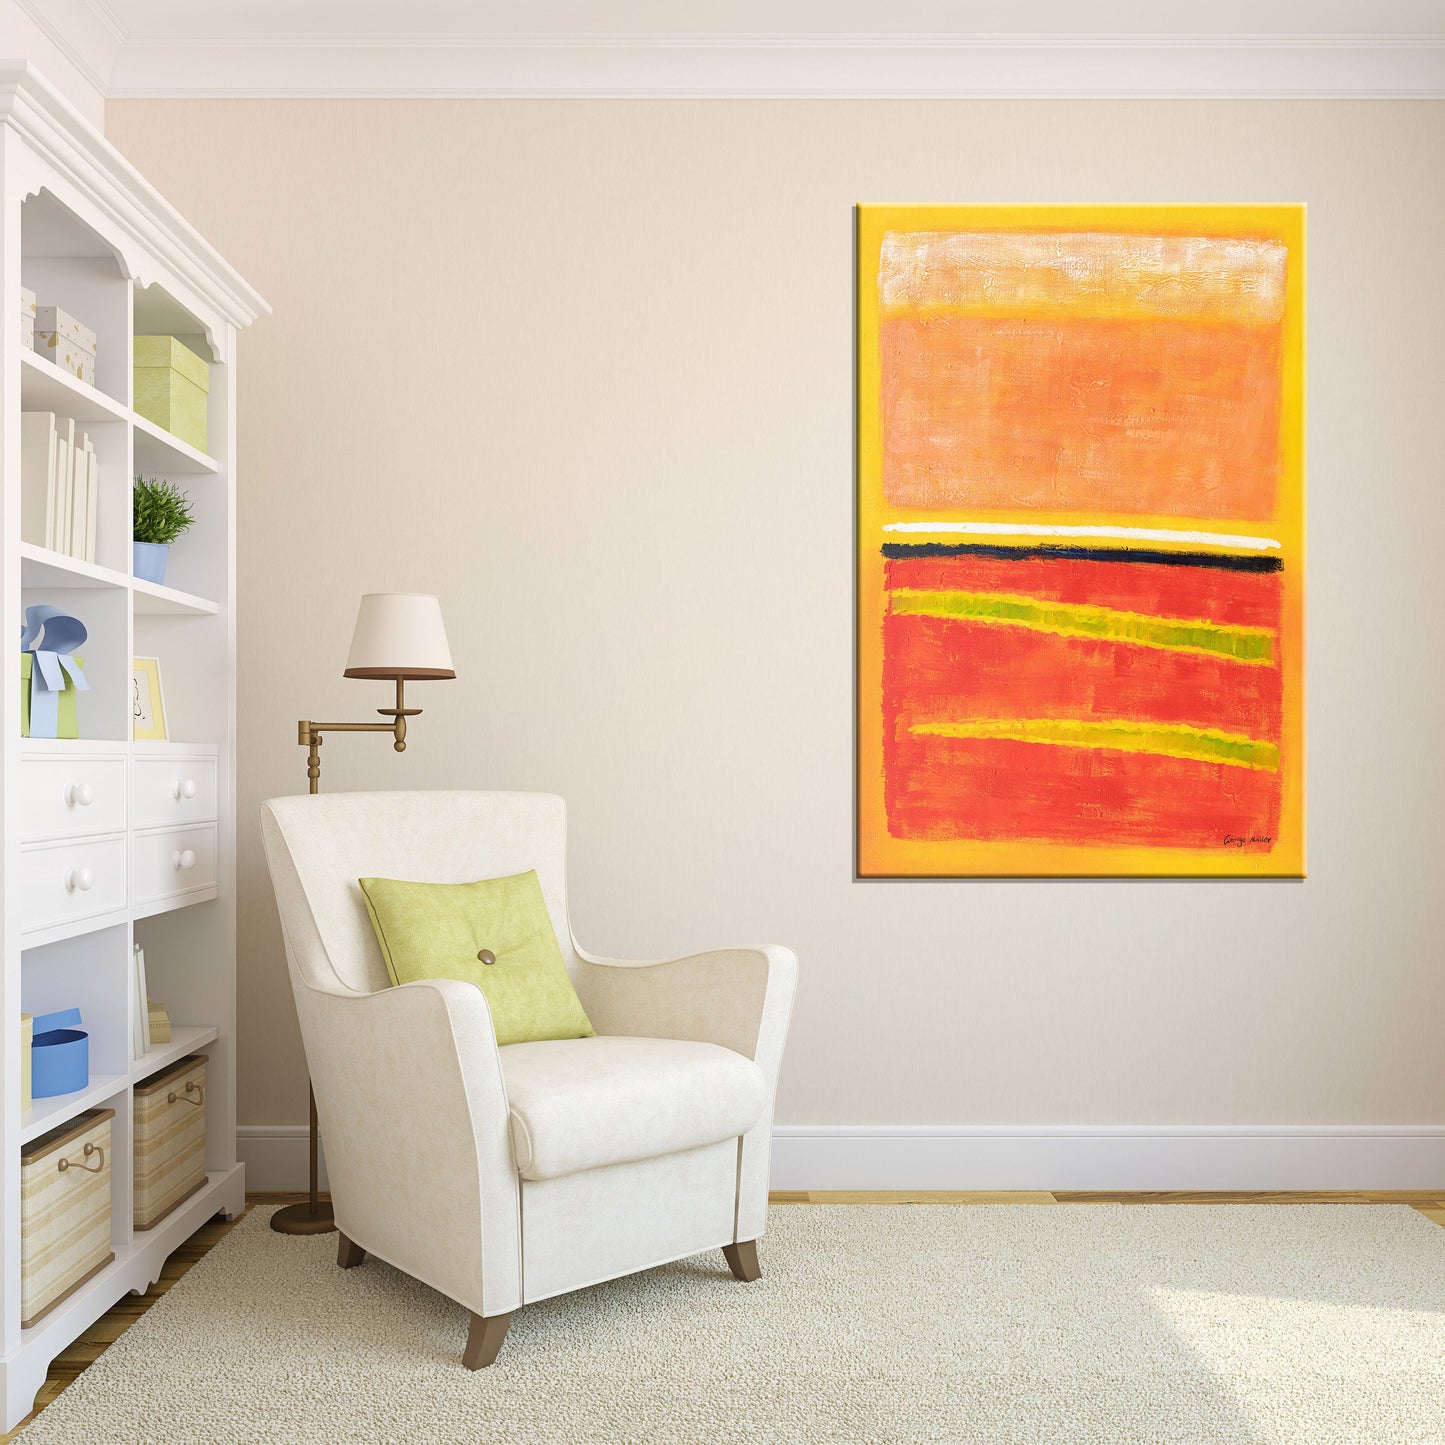 Painting Abstract, Oil Painting Canvas Art, Abstract Canvas Painting, Canvas Wall Art, Large Original Painting, Modern Painting, Mark Rothko